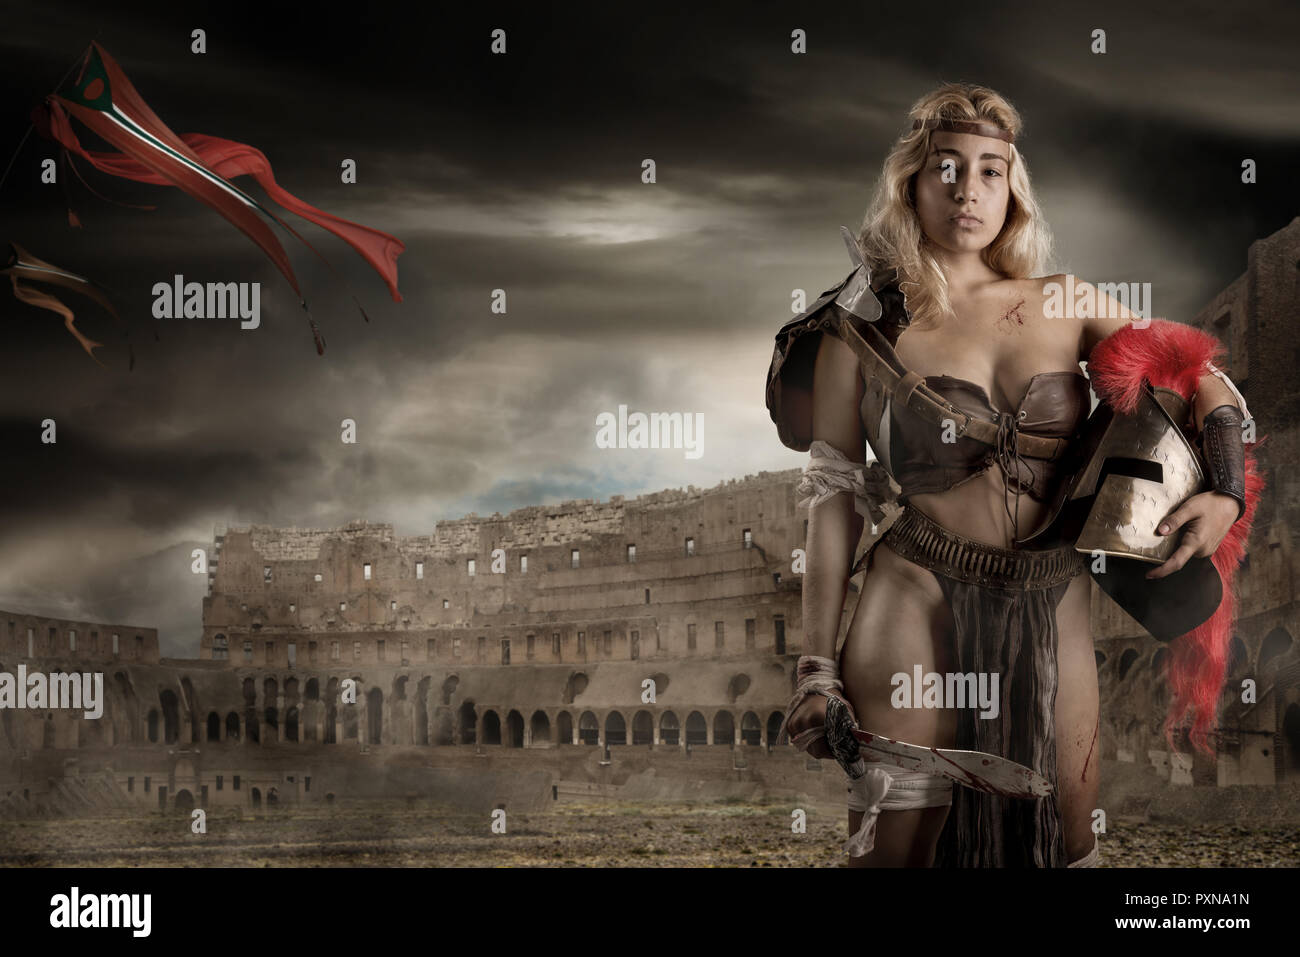 Ancient woman warrior or Gladiator in the arena Stock Photo - Alamy